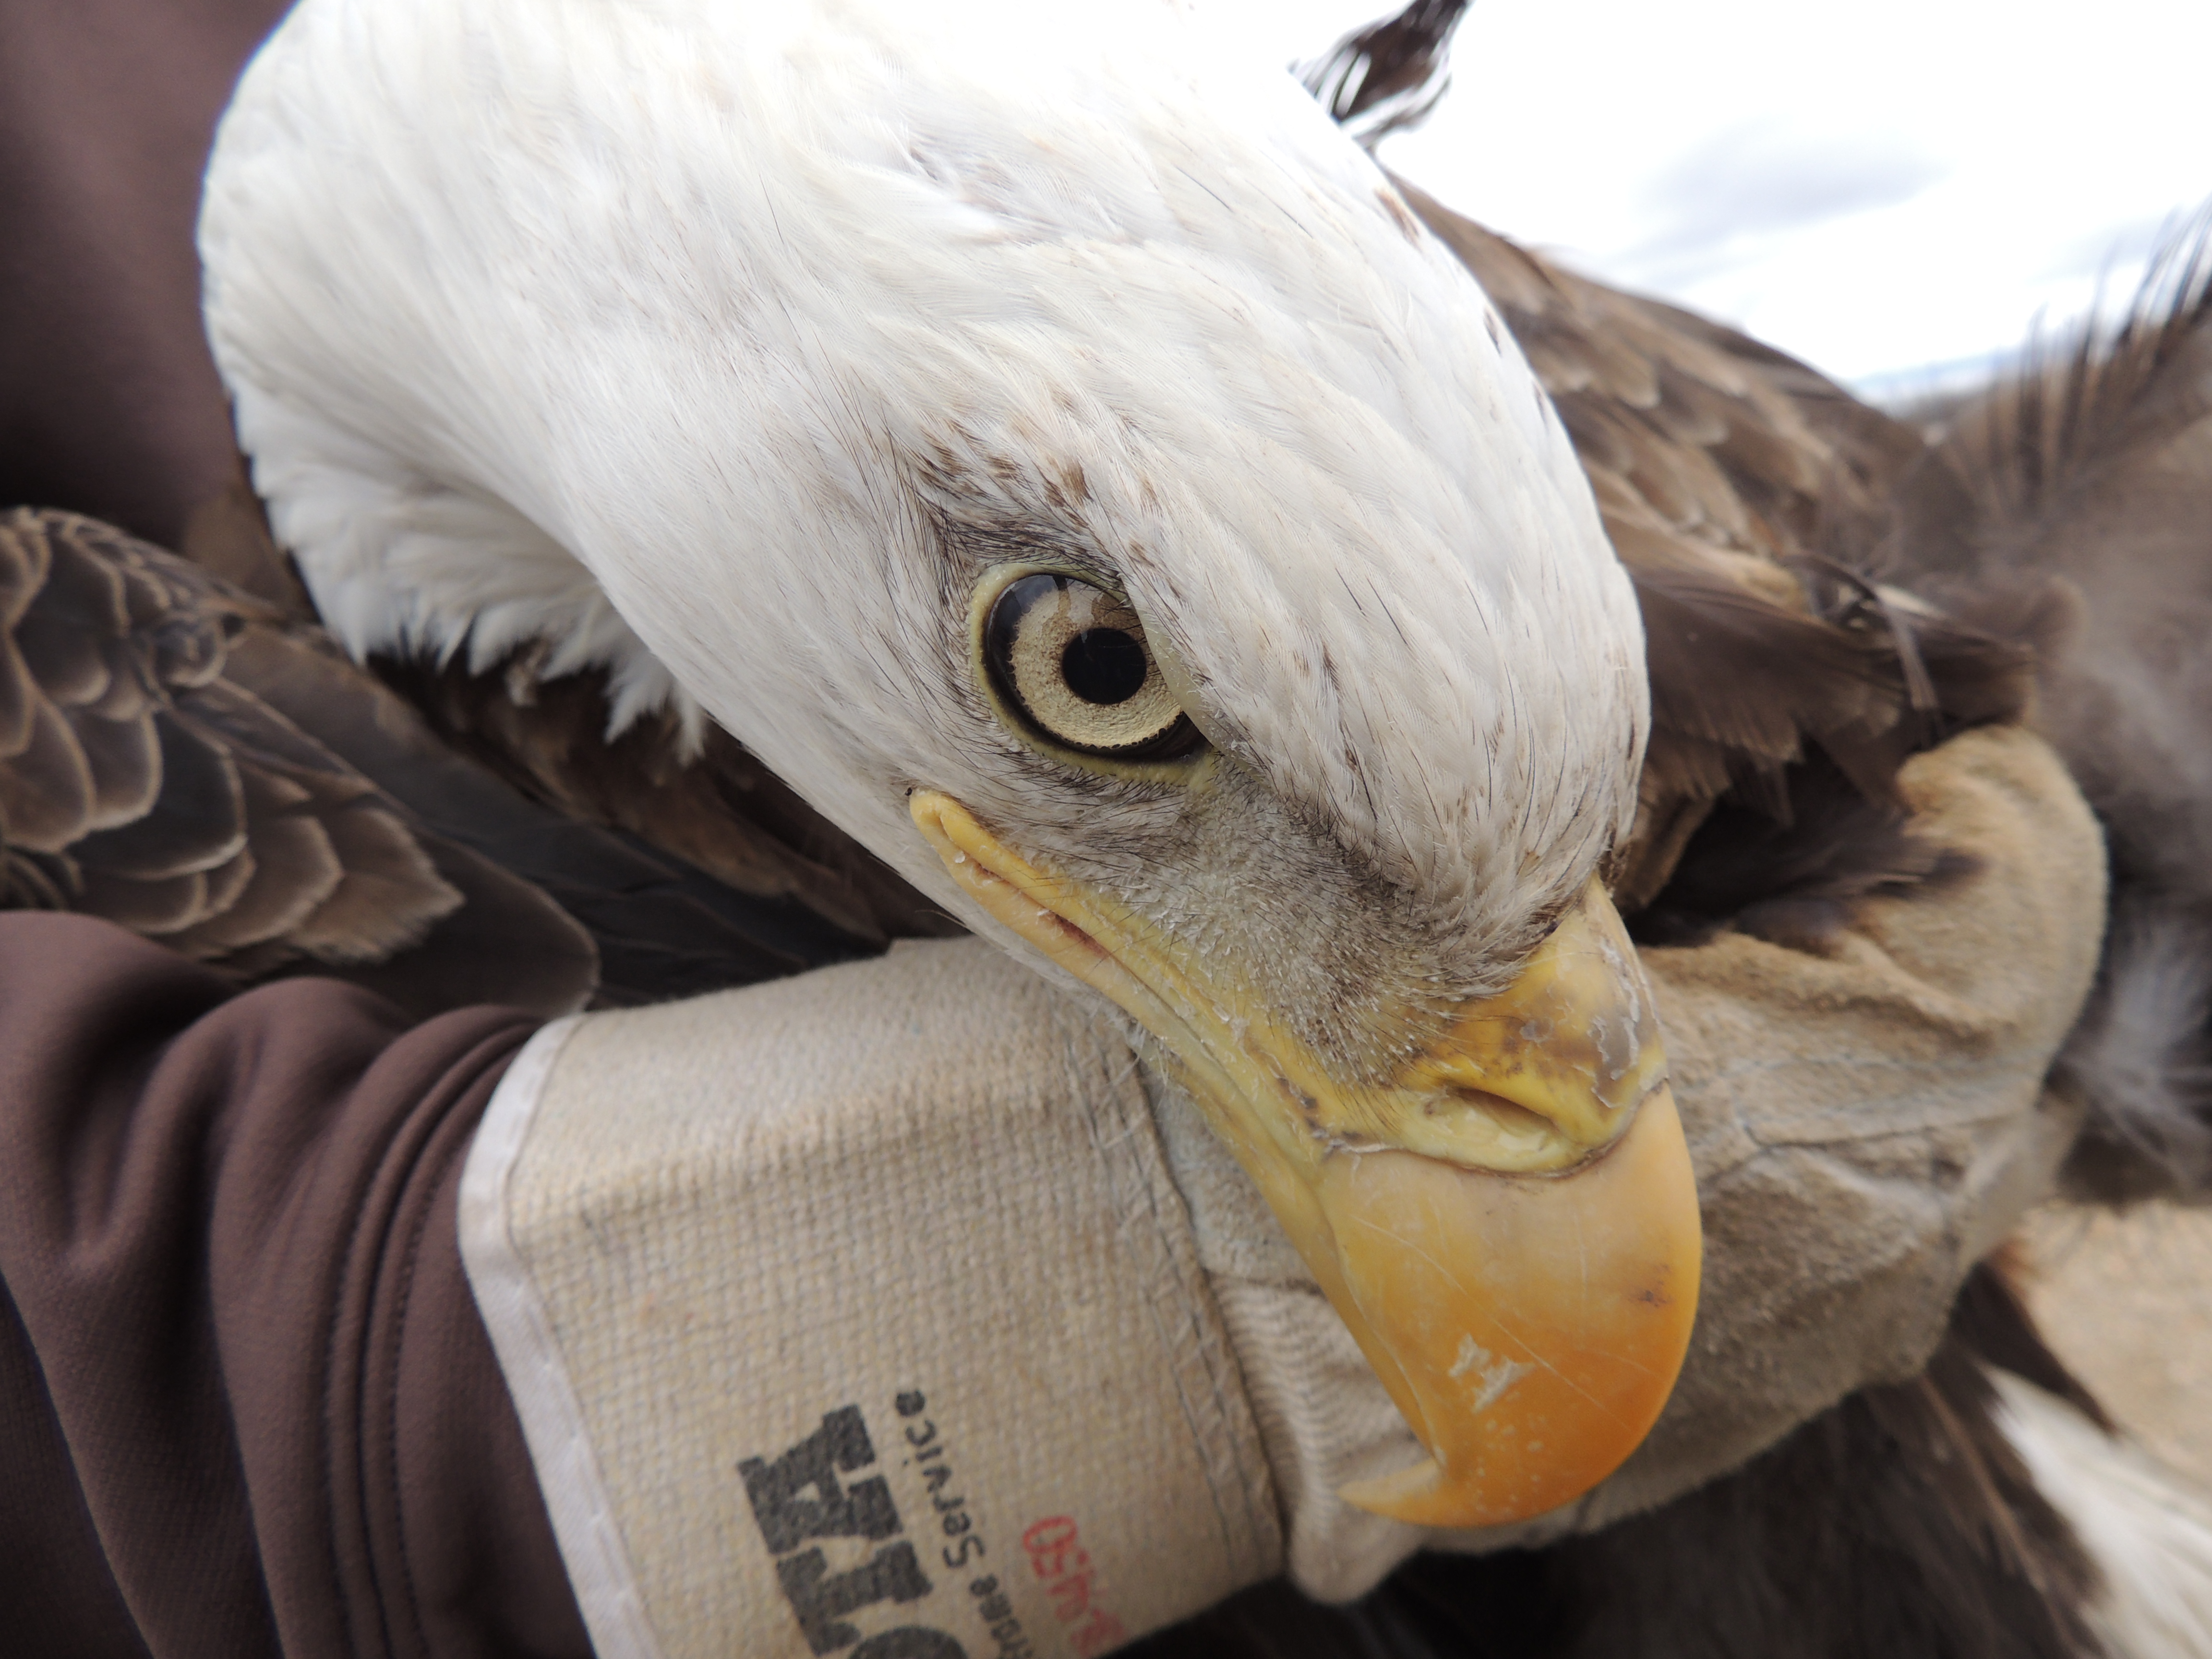 A gloved hand holds an injured bald eagle. This is a closeup of the bald eagle's head. The head is white, the eye is pale yellow, and the beak is bright yellow.